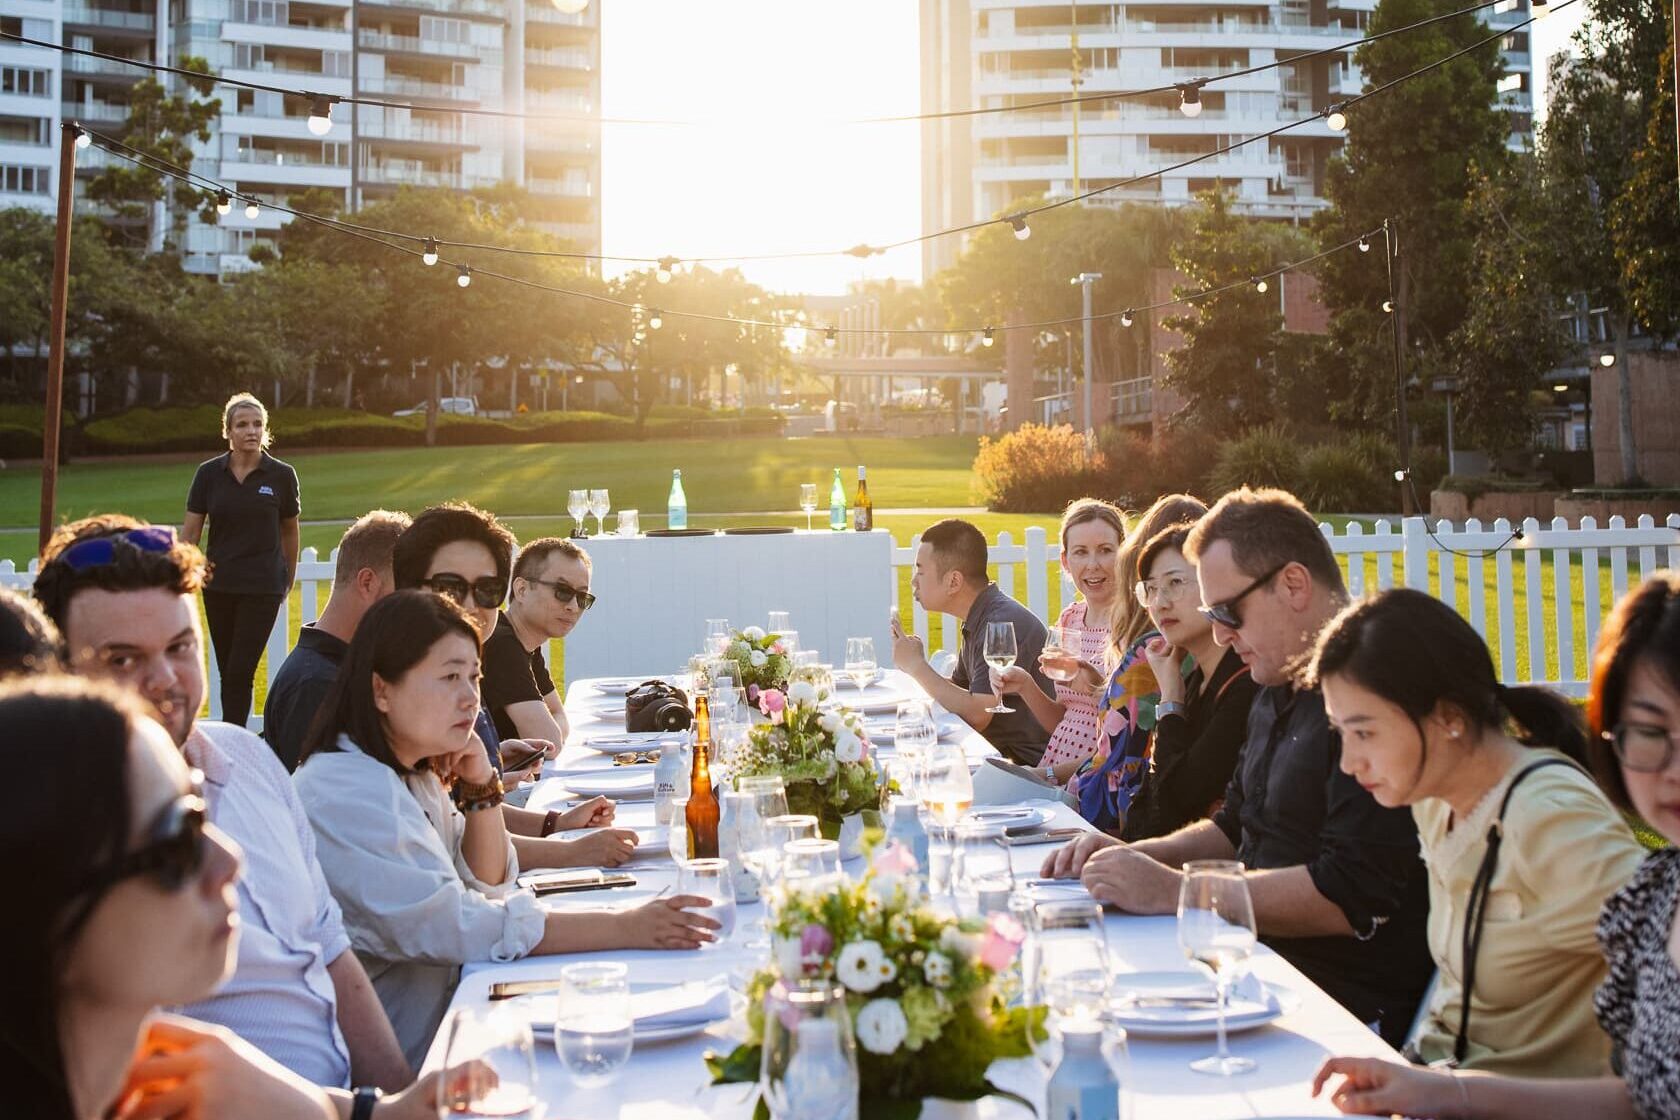 dining is a type of social capital of travel incentive